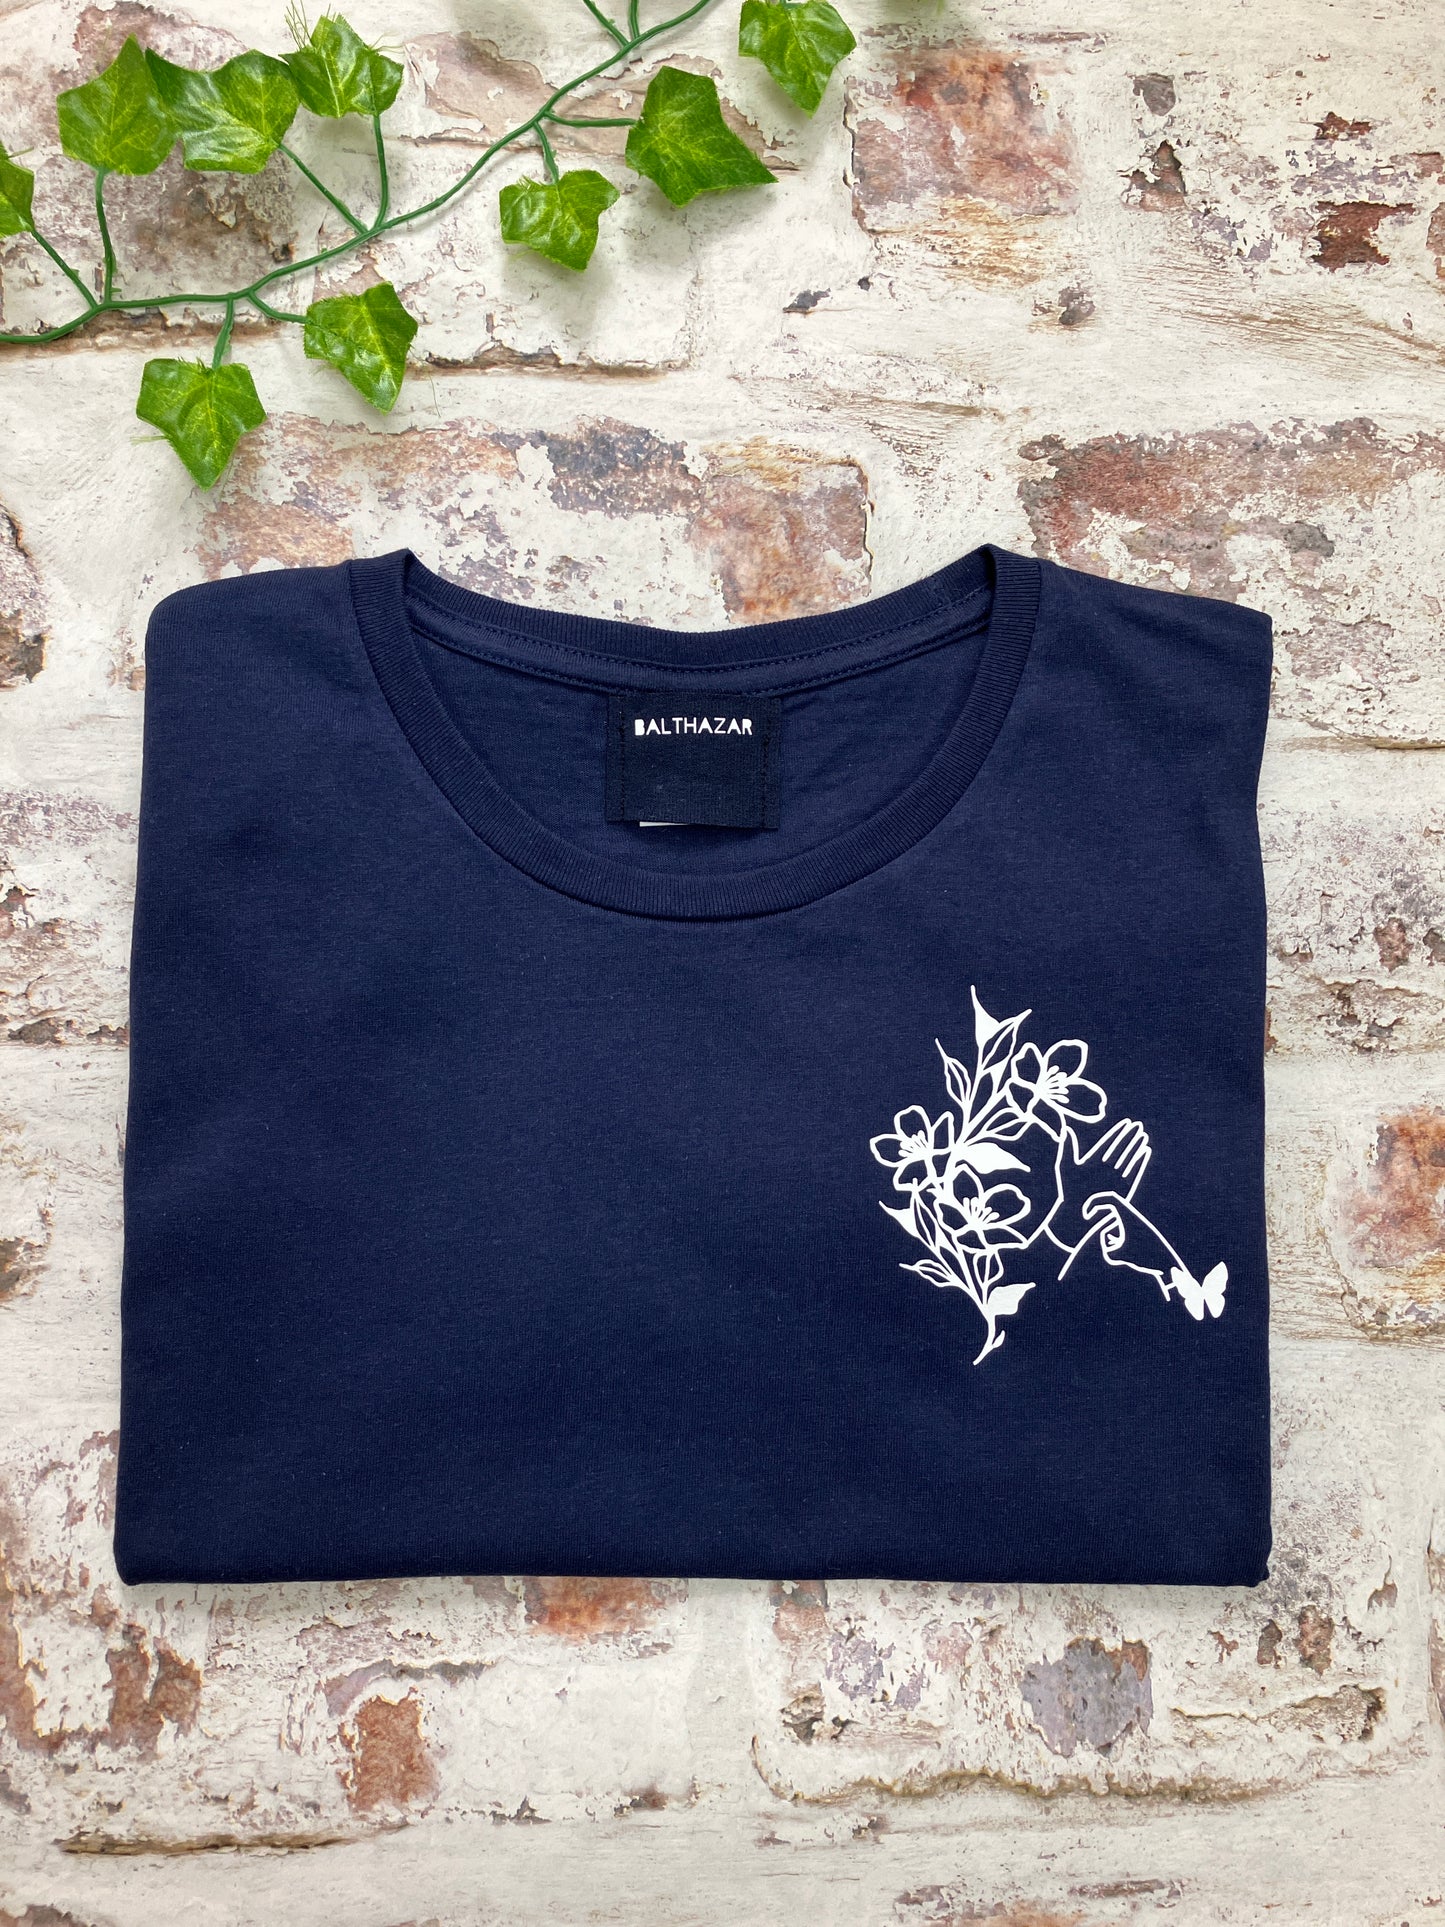 BSL Floral Initial custom t-shirt - sign language